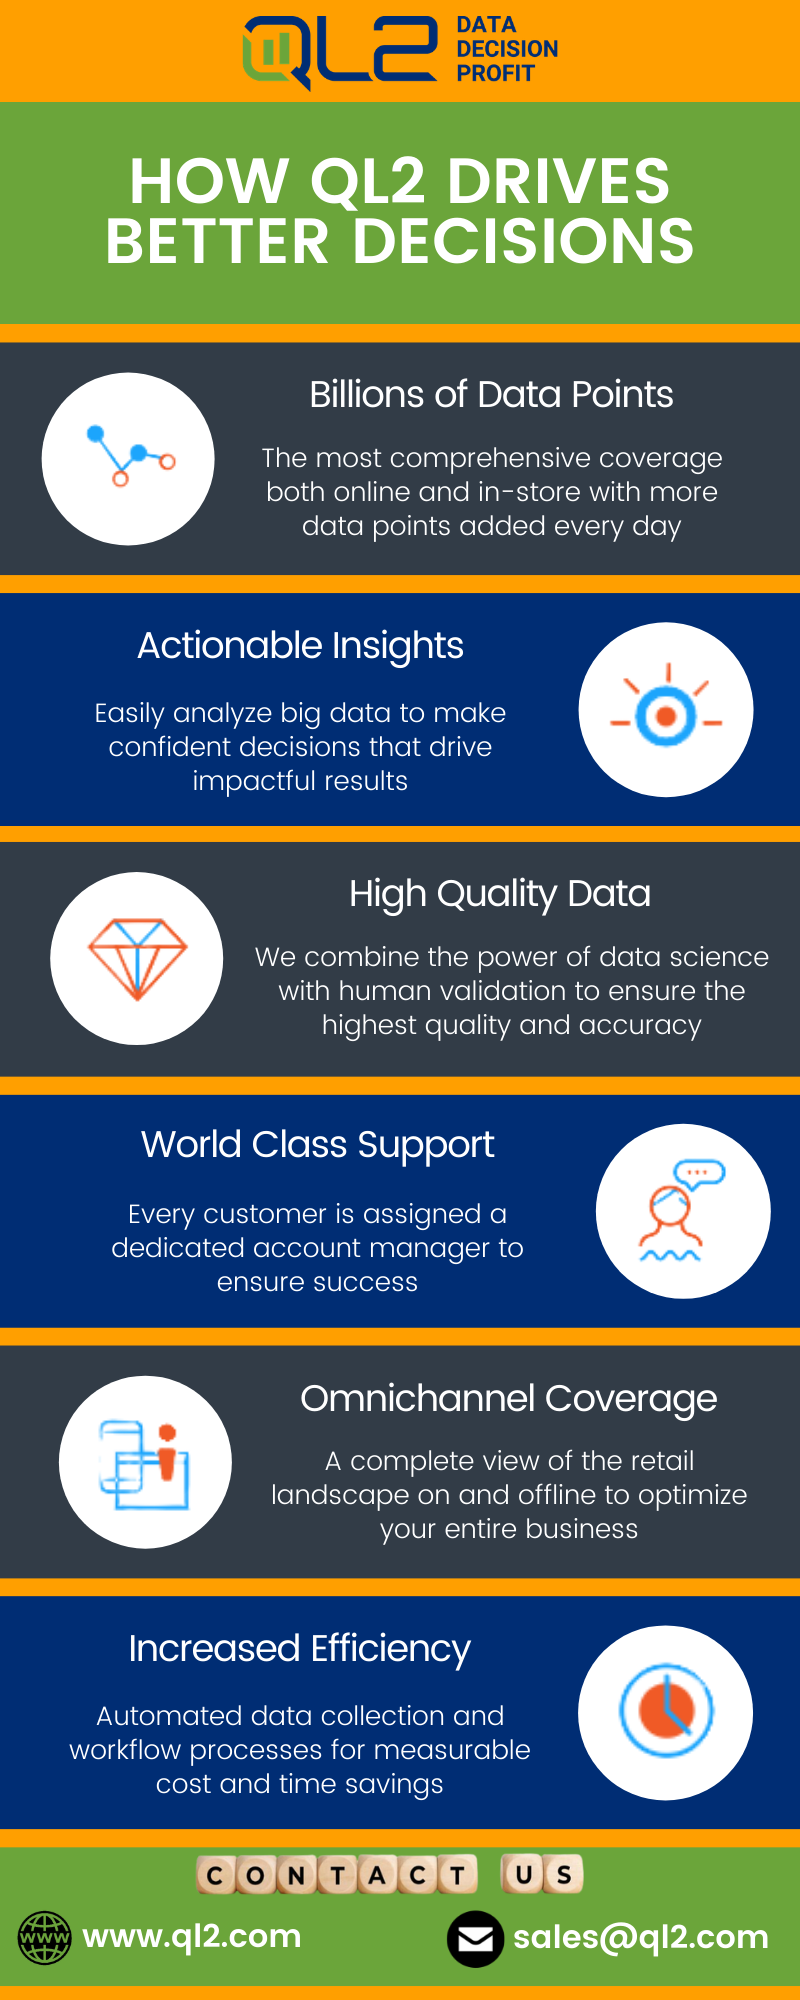 QL2 drives better decisions through: billions of data points, actionable insights, high quality data, world class support, omnichannel coverage, and increased efficiencies.